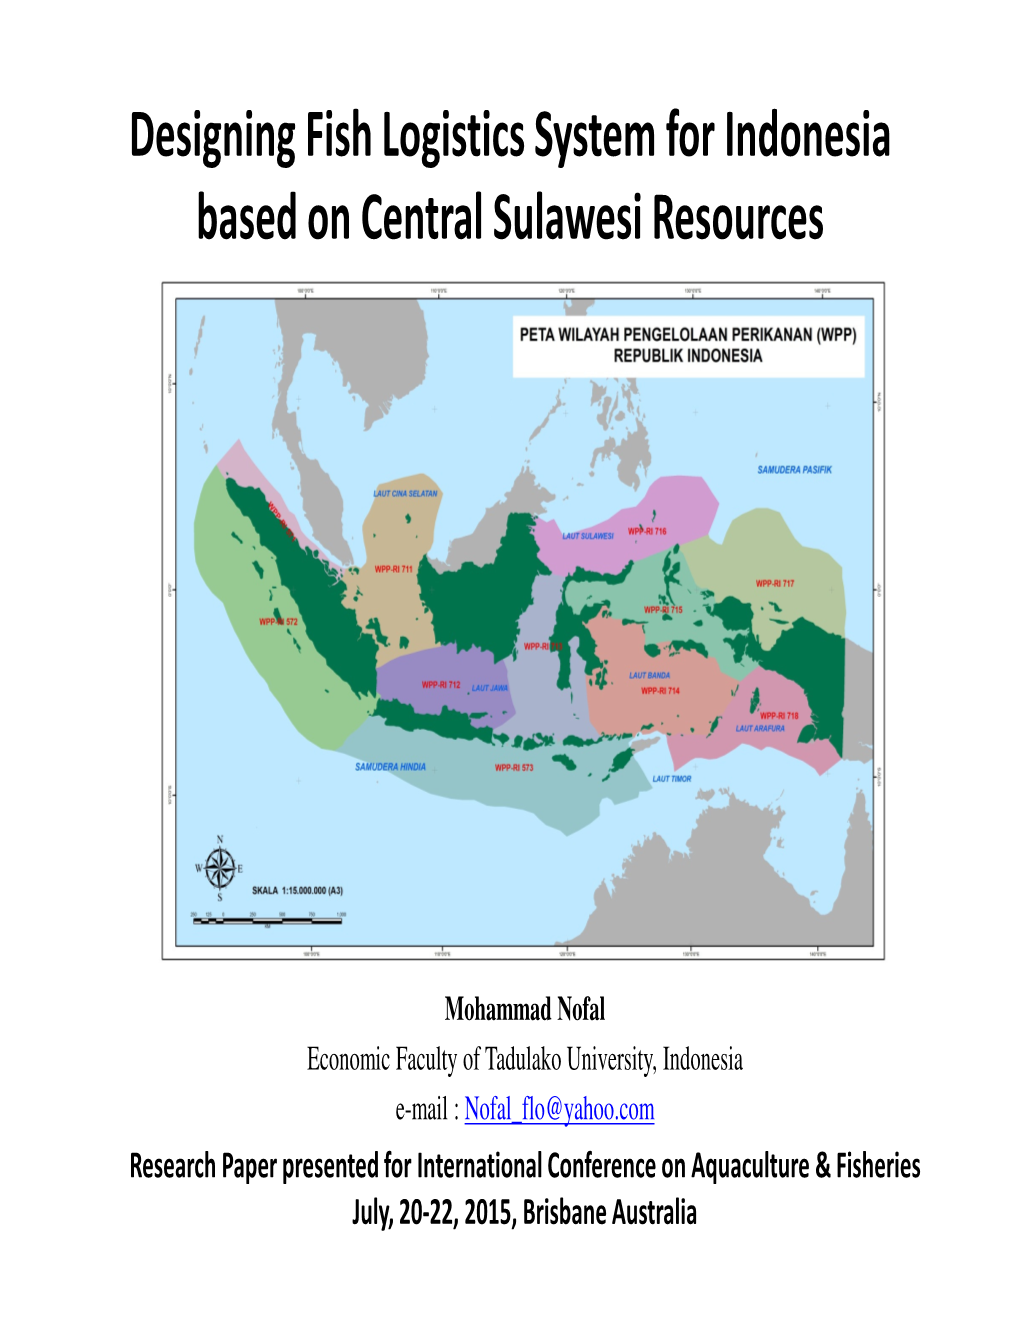 Designing Fish Logistics System for Indonesia Based on Central Sulawesi Resources